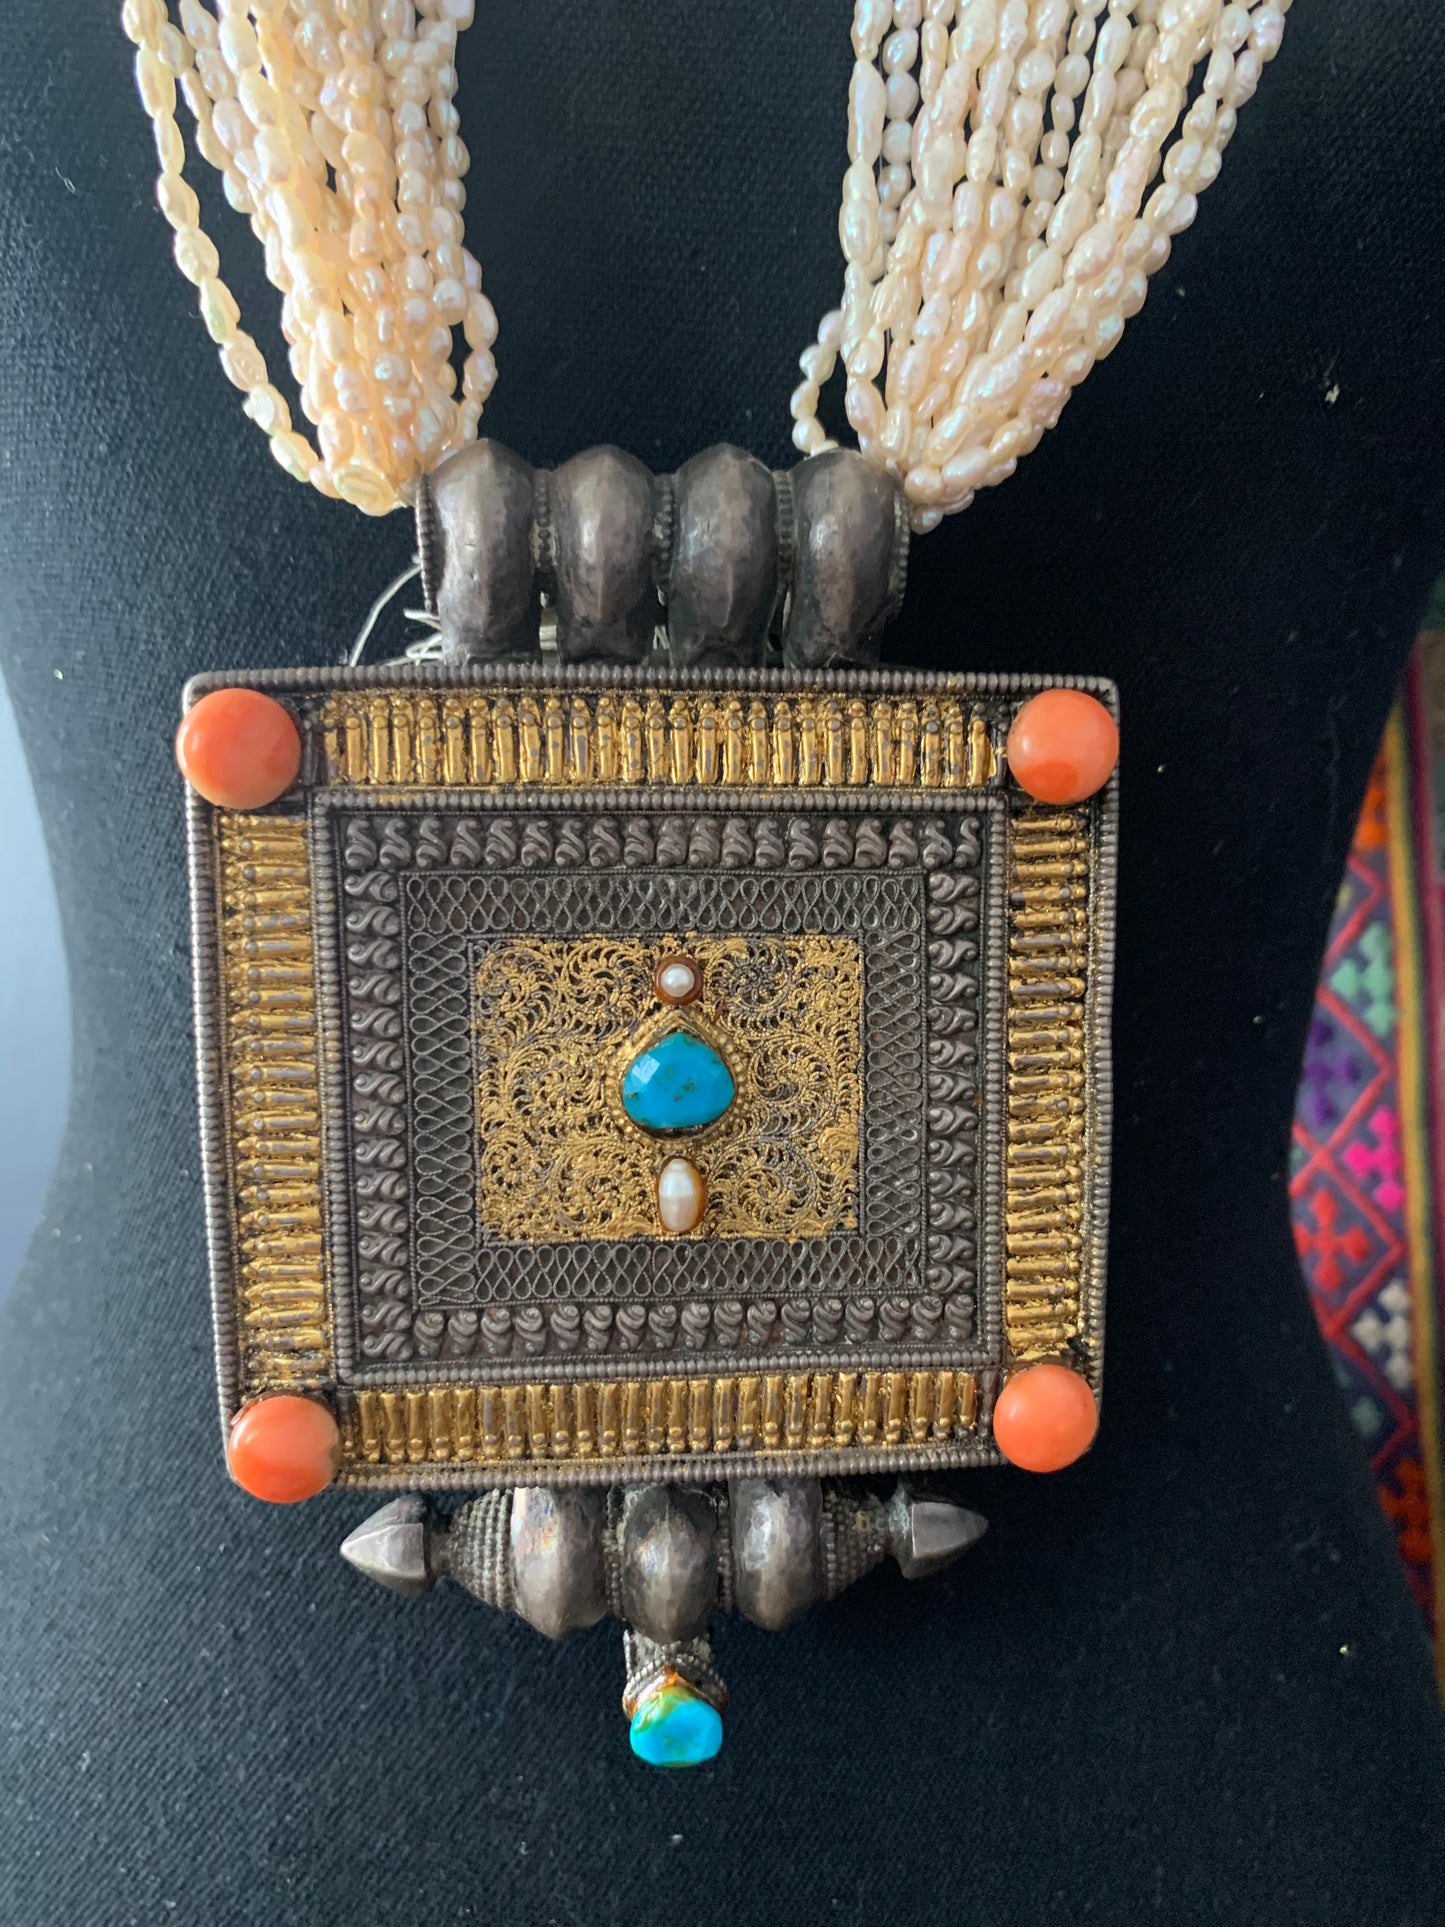 A Tibetan silver ghau with pearls and turquoise.